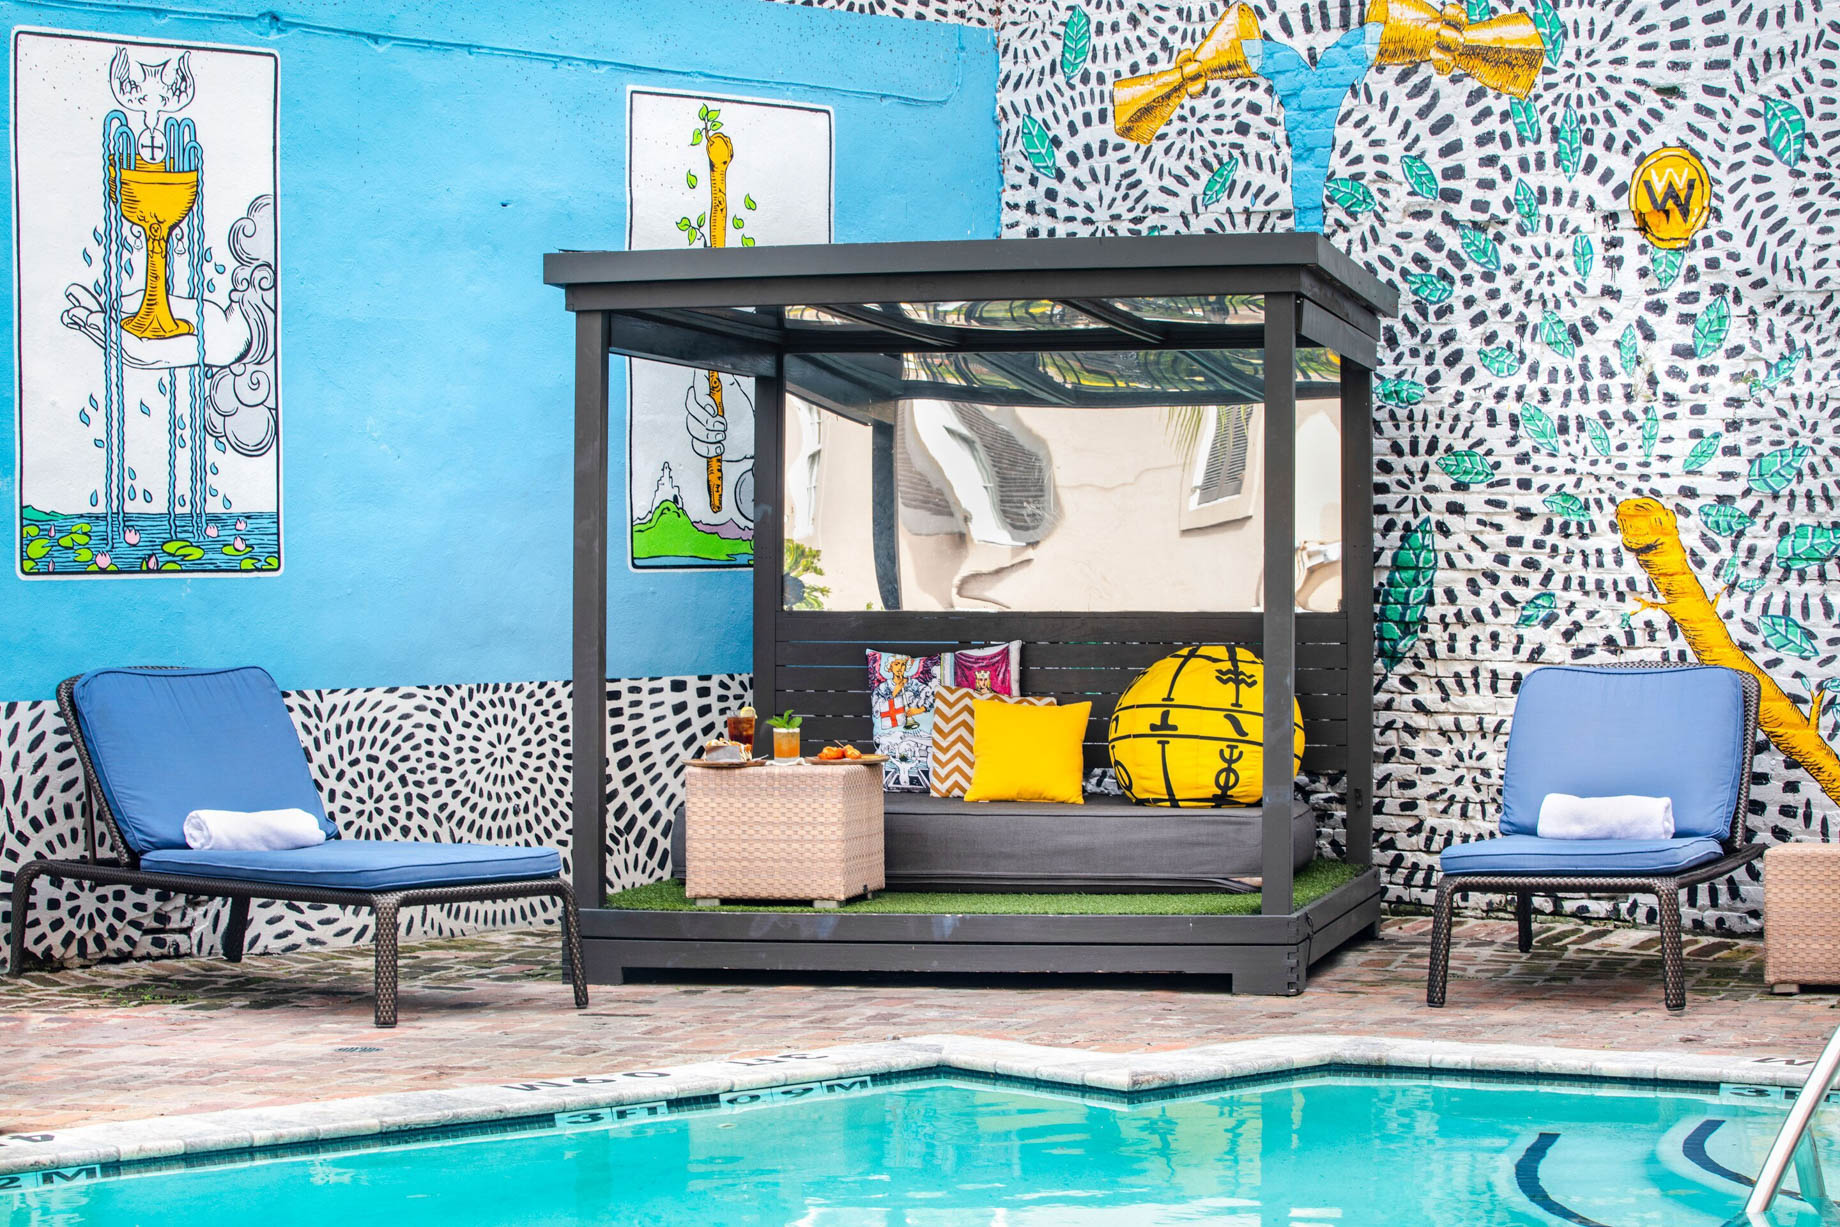 W New Orleans French Quarter Hotel – New Orleans, LA, USA – WET Deck Courtyard Pool Chairs